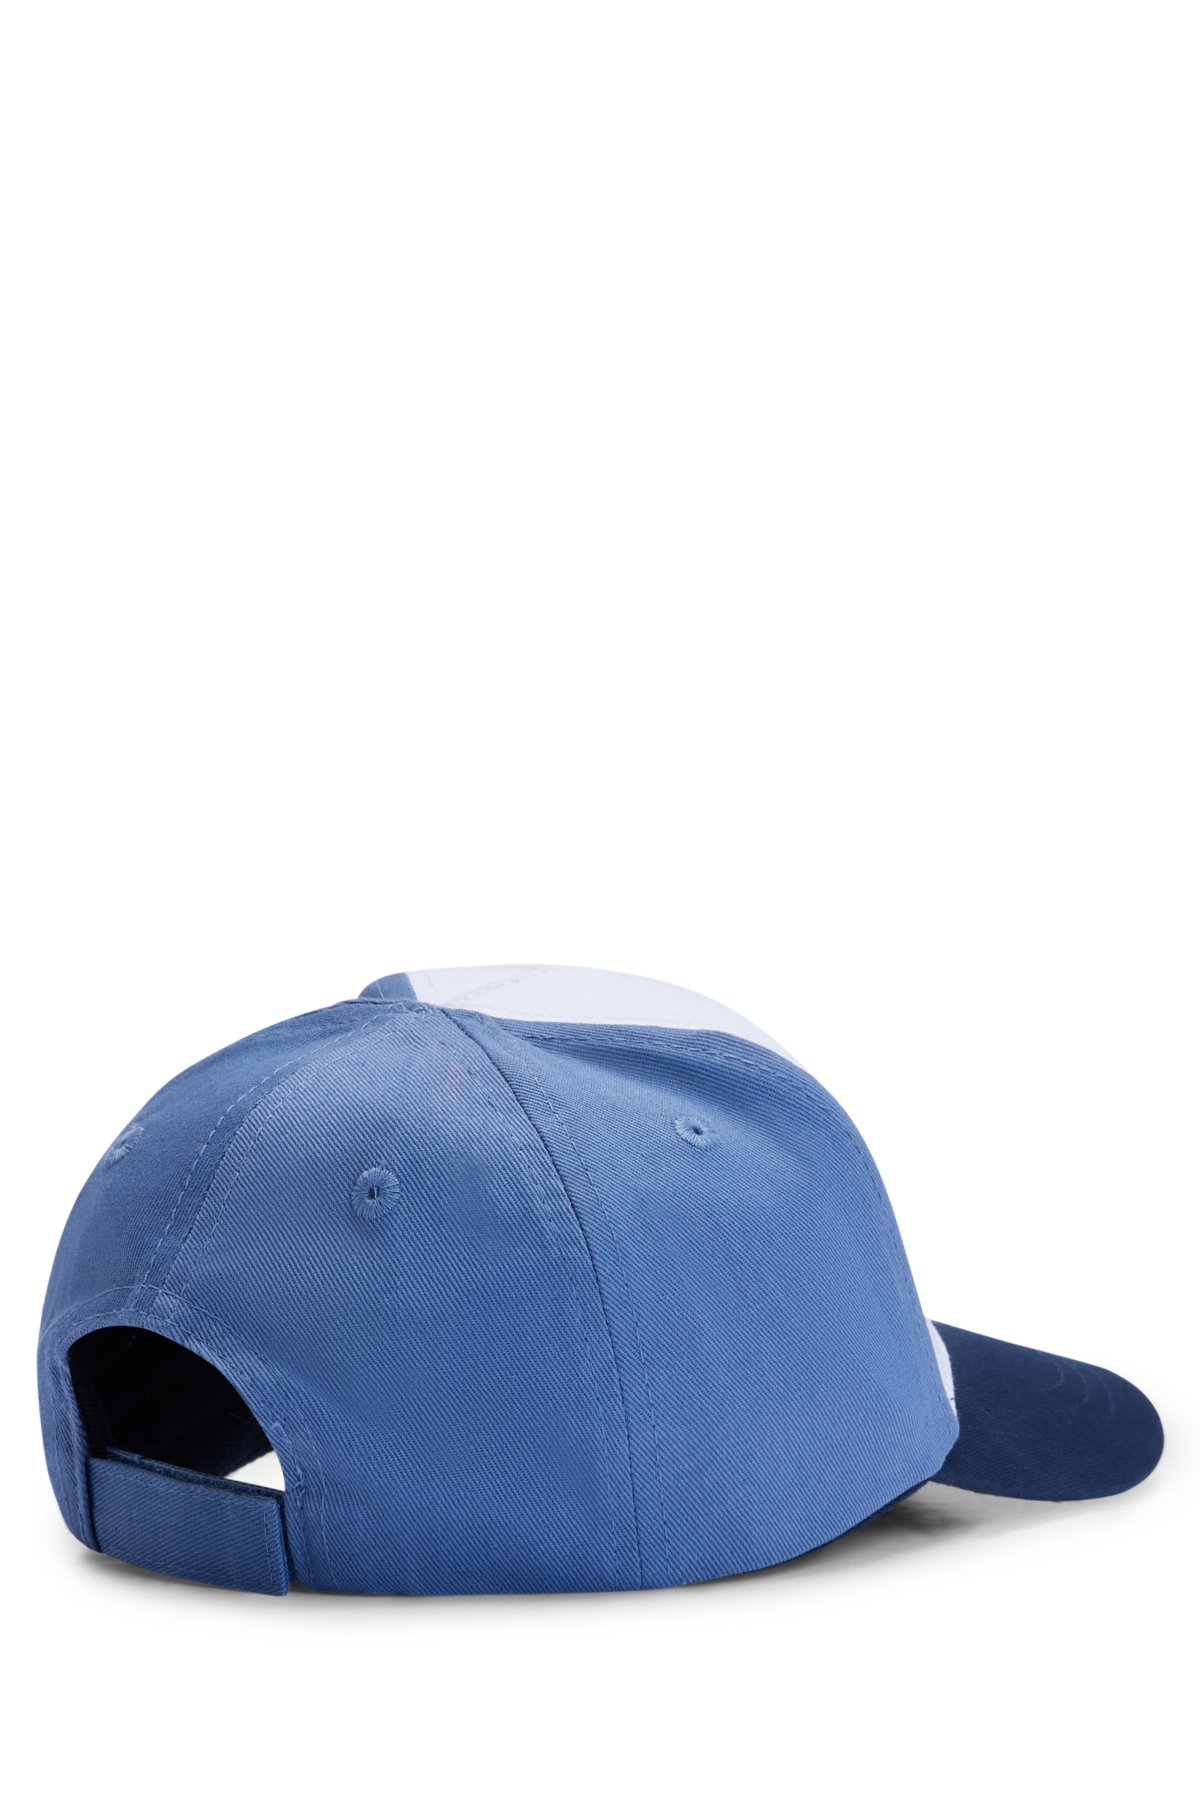 Kids' cap in cotton twill with logo print, White